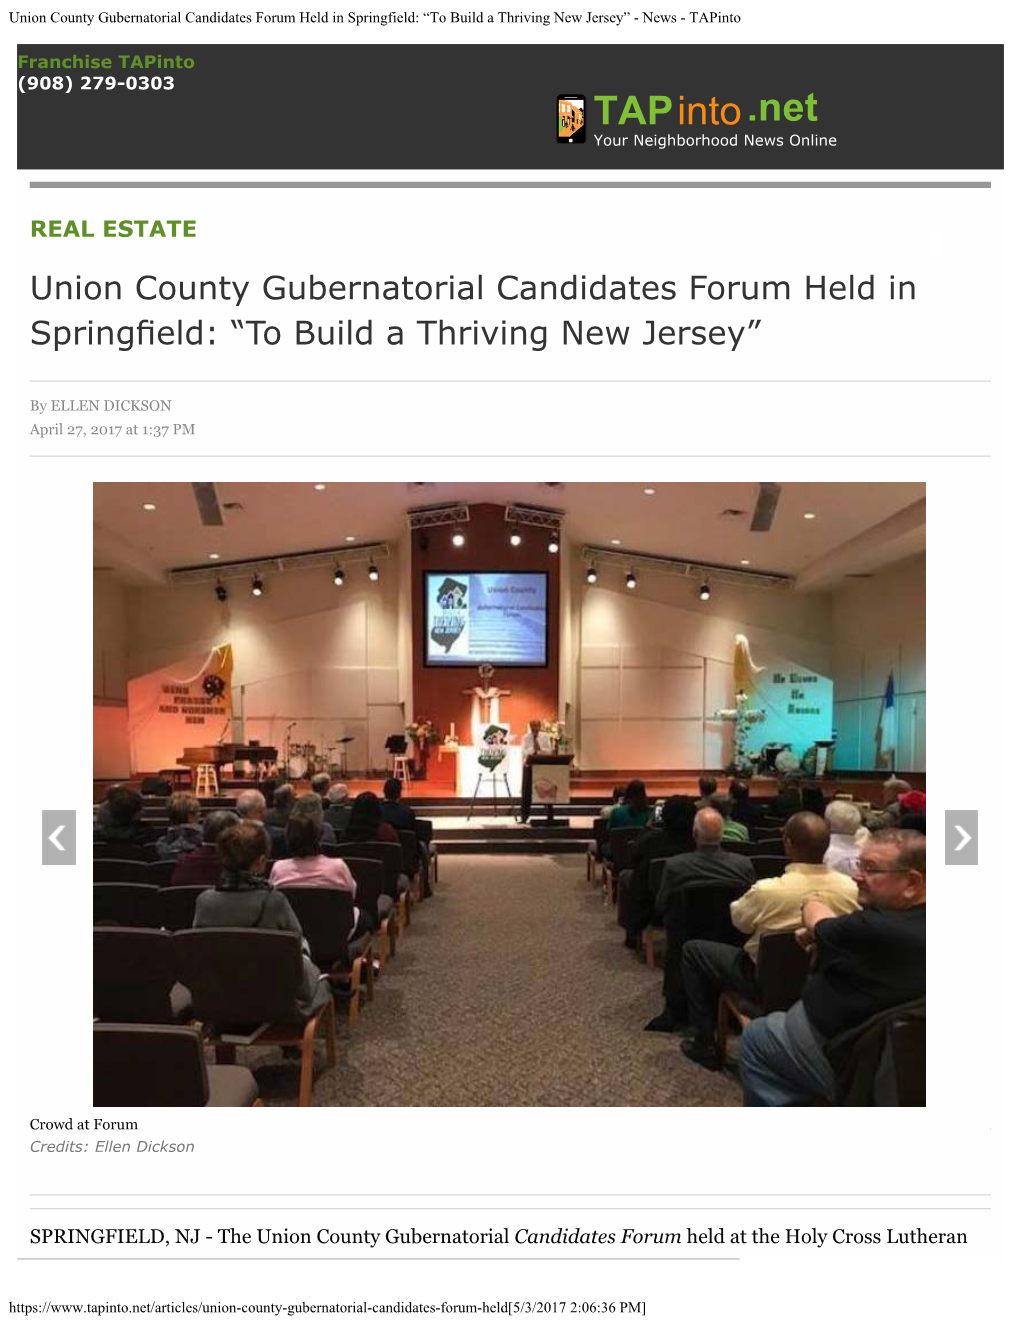 Union County Gubernatorial Candidates Forum Held in Springfield: “To Build a Thriving New Jersey” - News - Tapinto